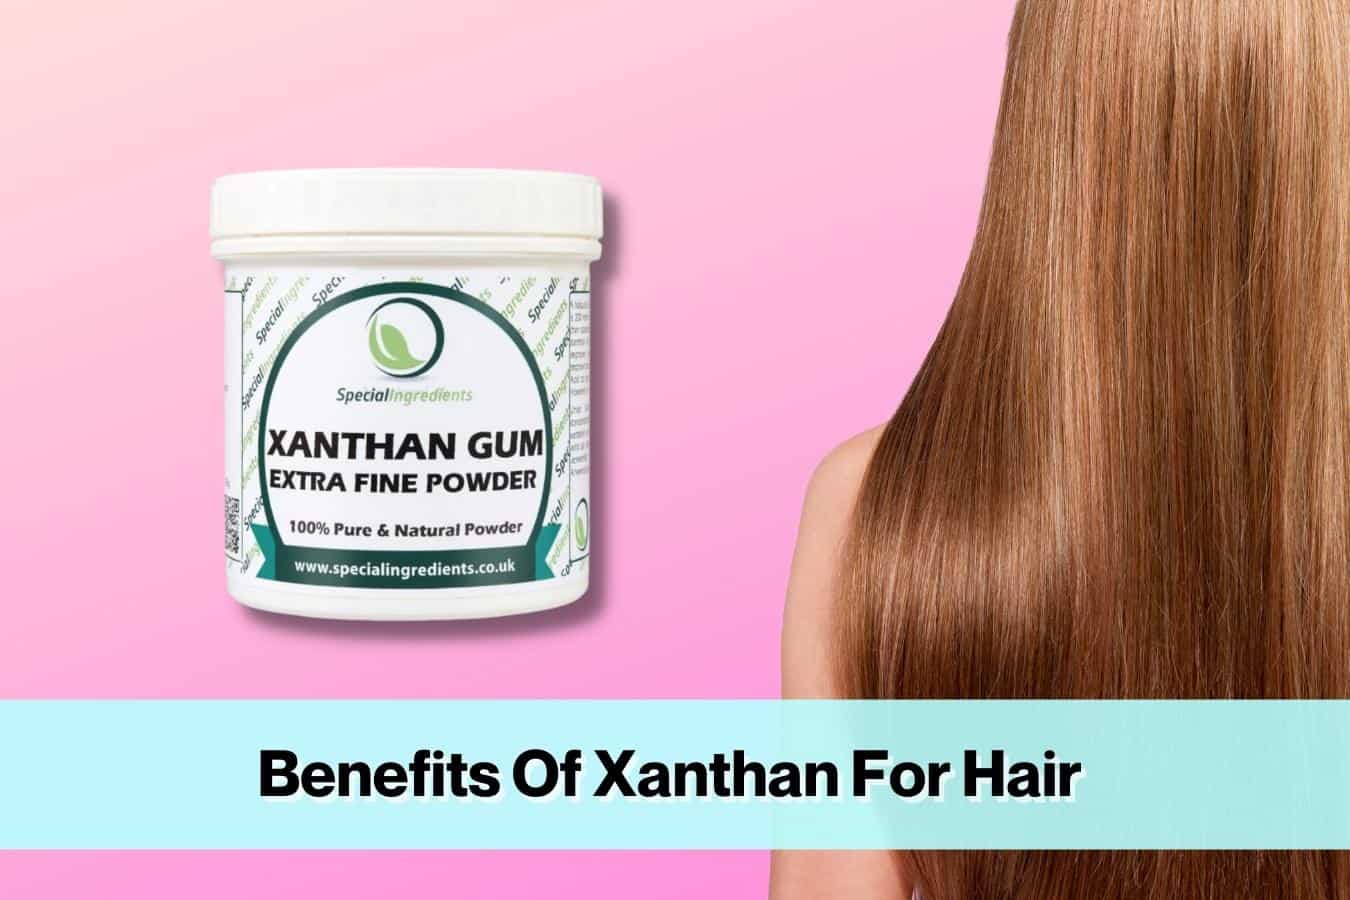 Benefits Of Xanthan Gum For Hair